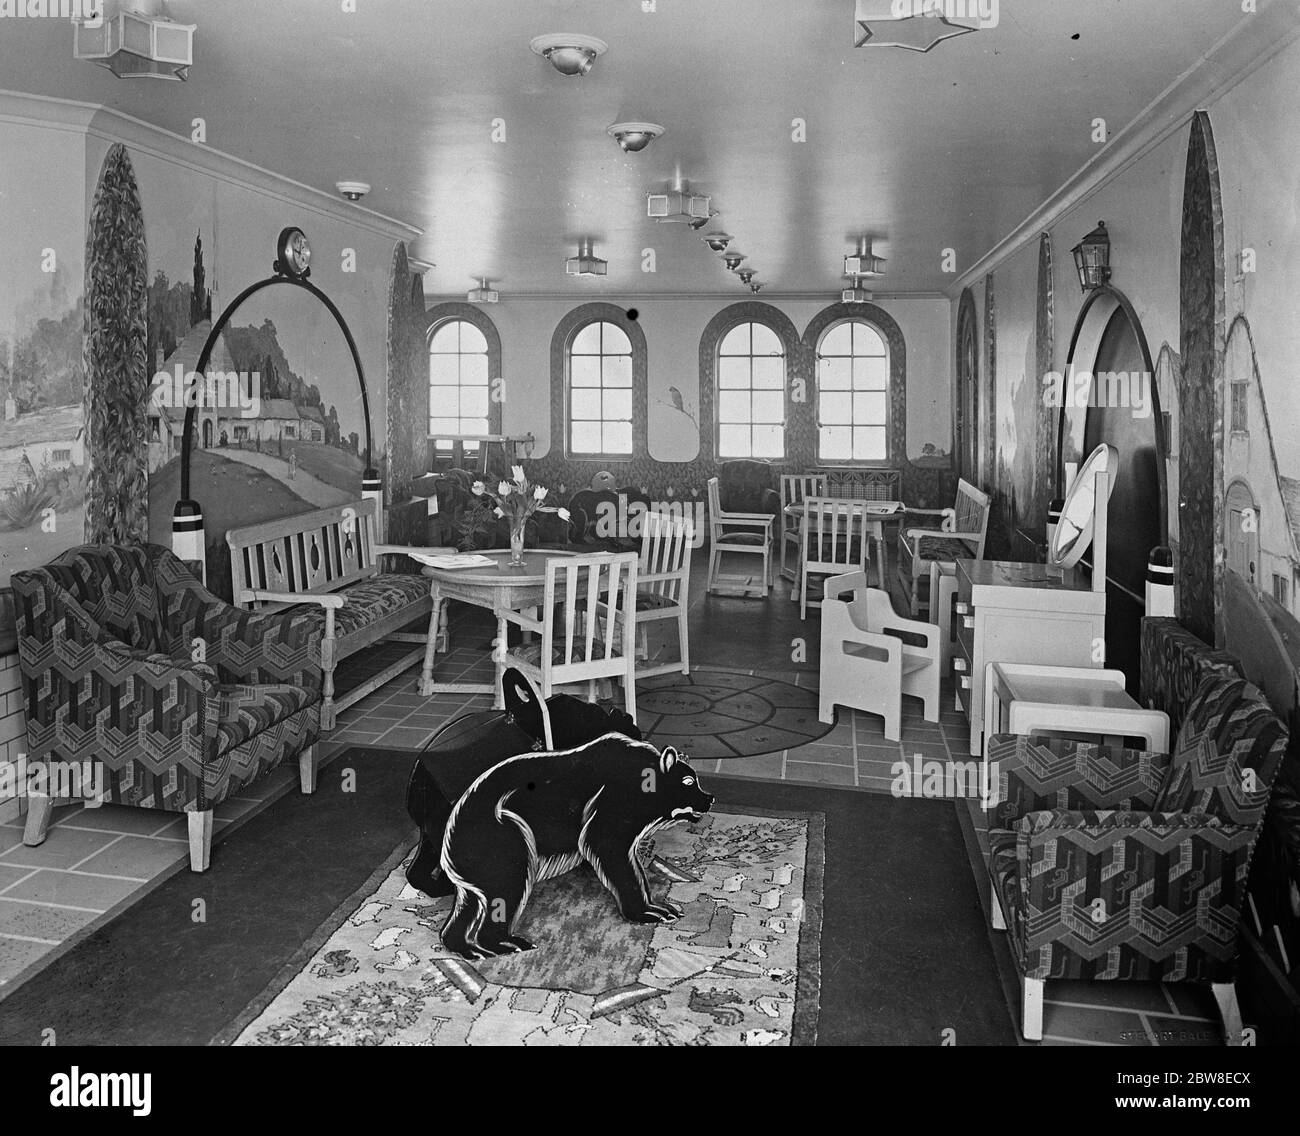 Wonder of the most up to date all - electric liner . The children 's room on the  Victory of India  which contains toys and games and is decorated with appropriate mural scenes such as animals and smugglers . 9 April 1929 Stock Photo